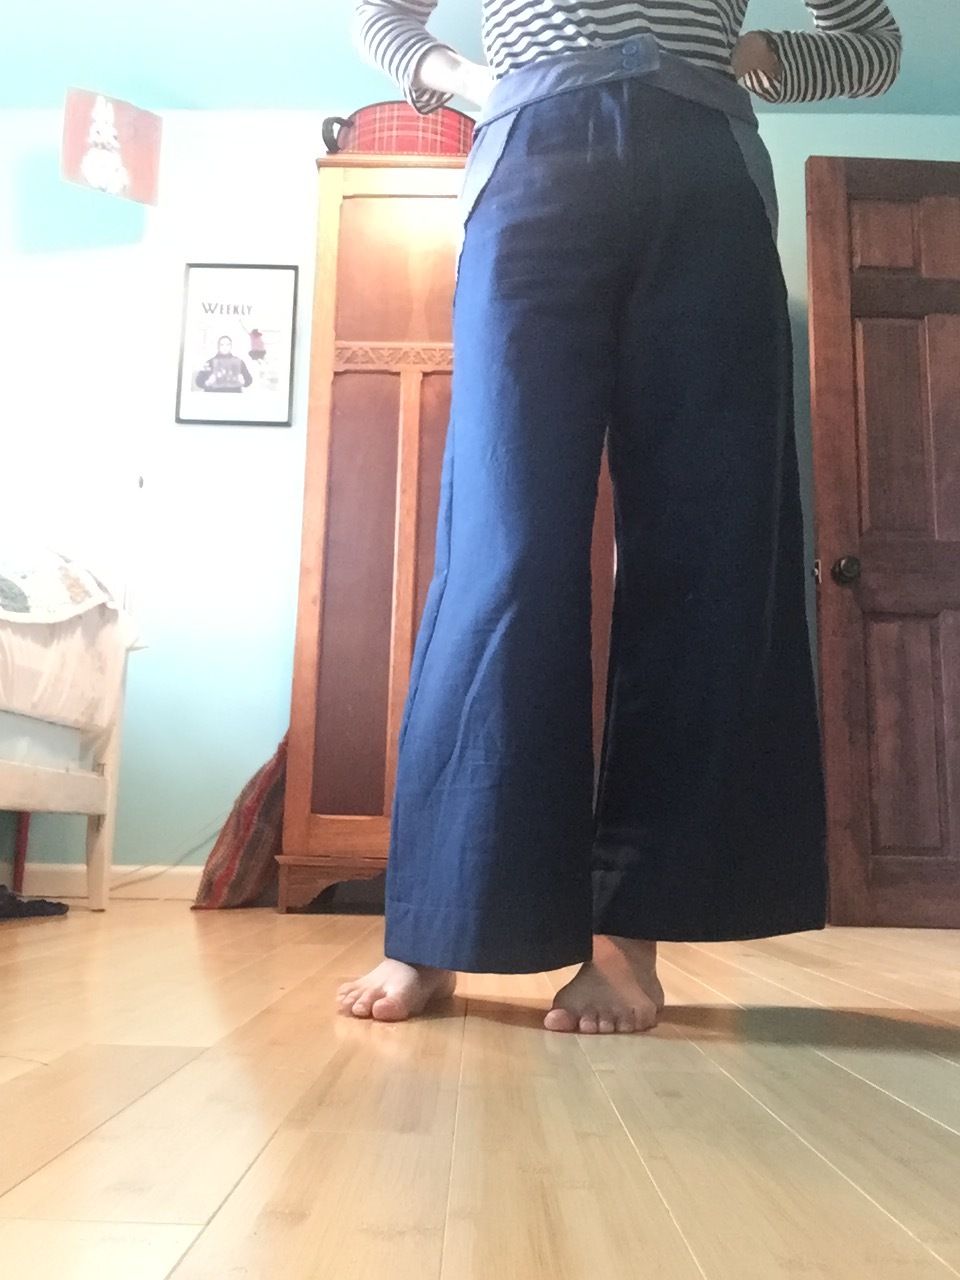 pants for learning (a long, slow, maddening process built of hair-tearing frustration and a single burst of euphoric relief)